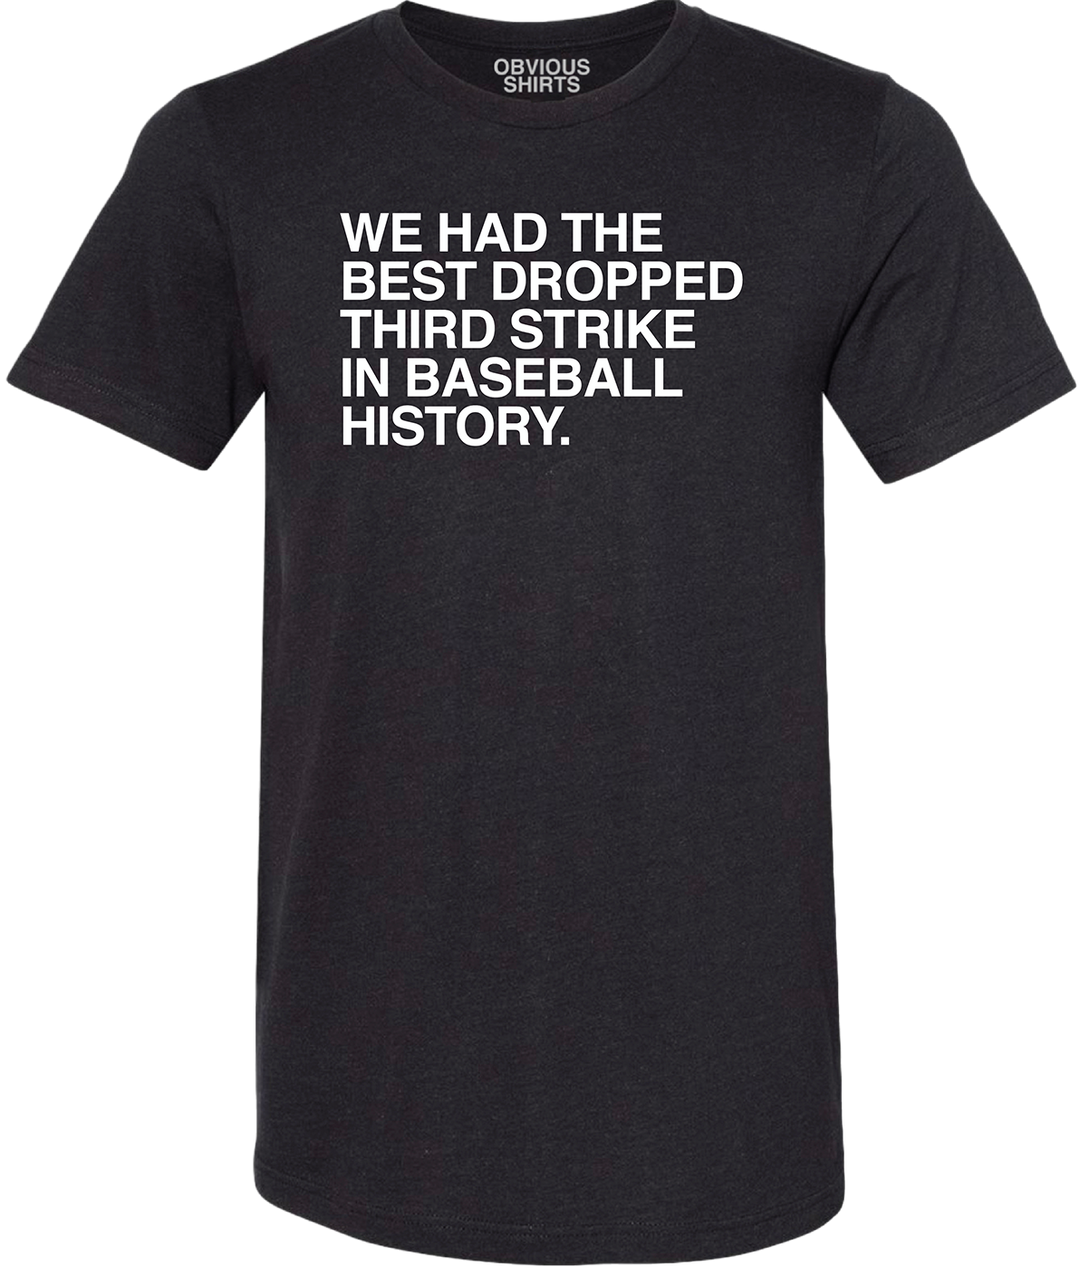 WE HAD THE BEST DROPPED THIRD STRIKE IN BASEBALL HISTORY. - OBVIOUS SHIRTS.